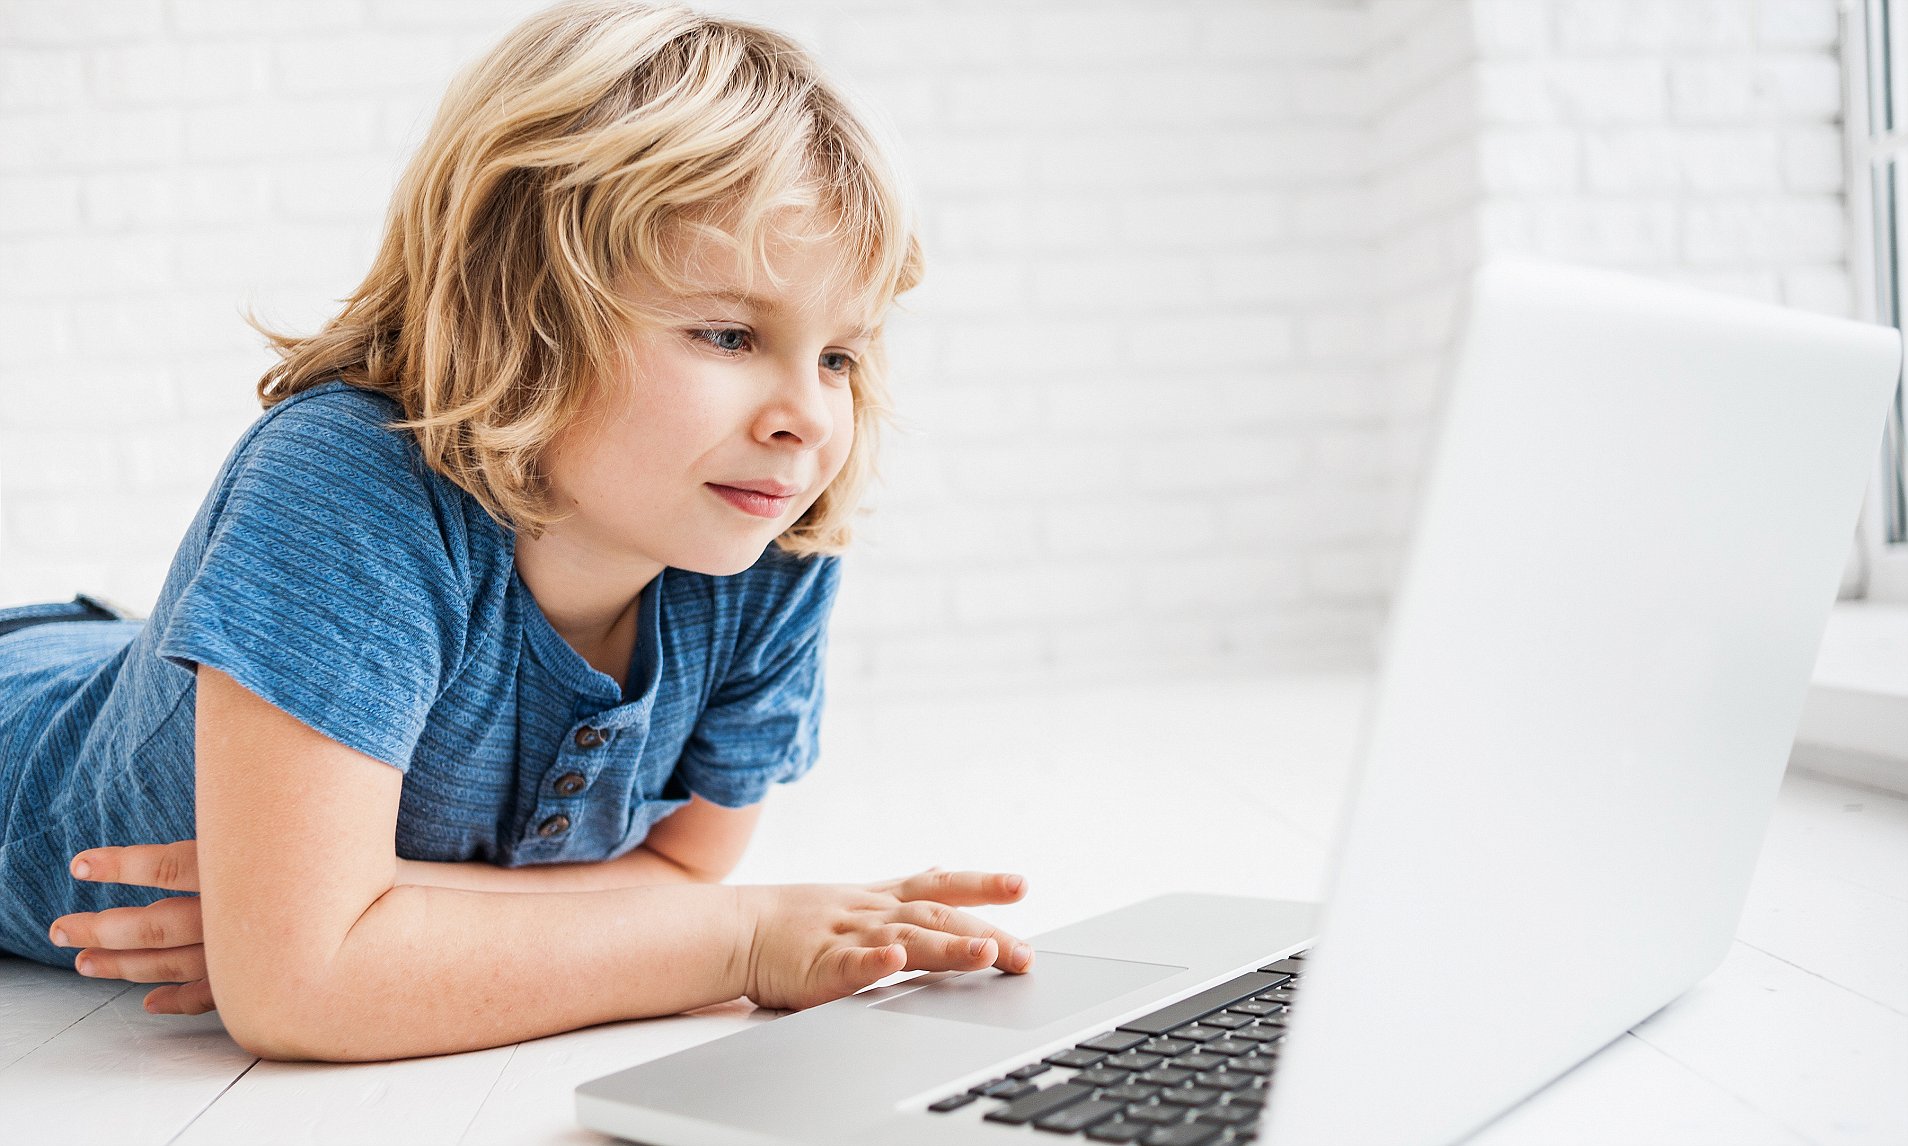 Online Child Safety – Tips to Keep your Child Safe Online